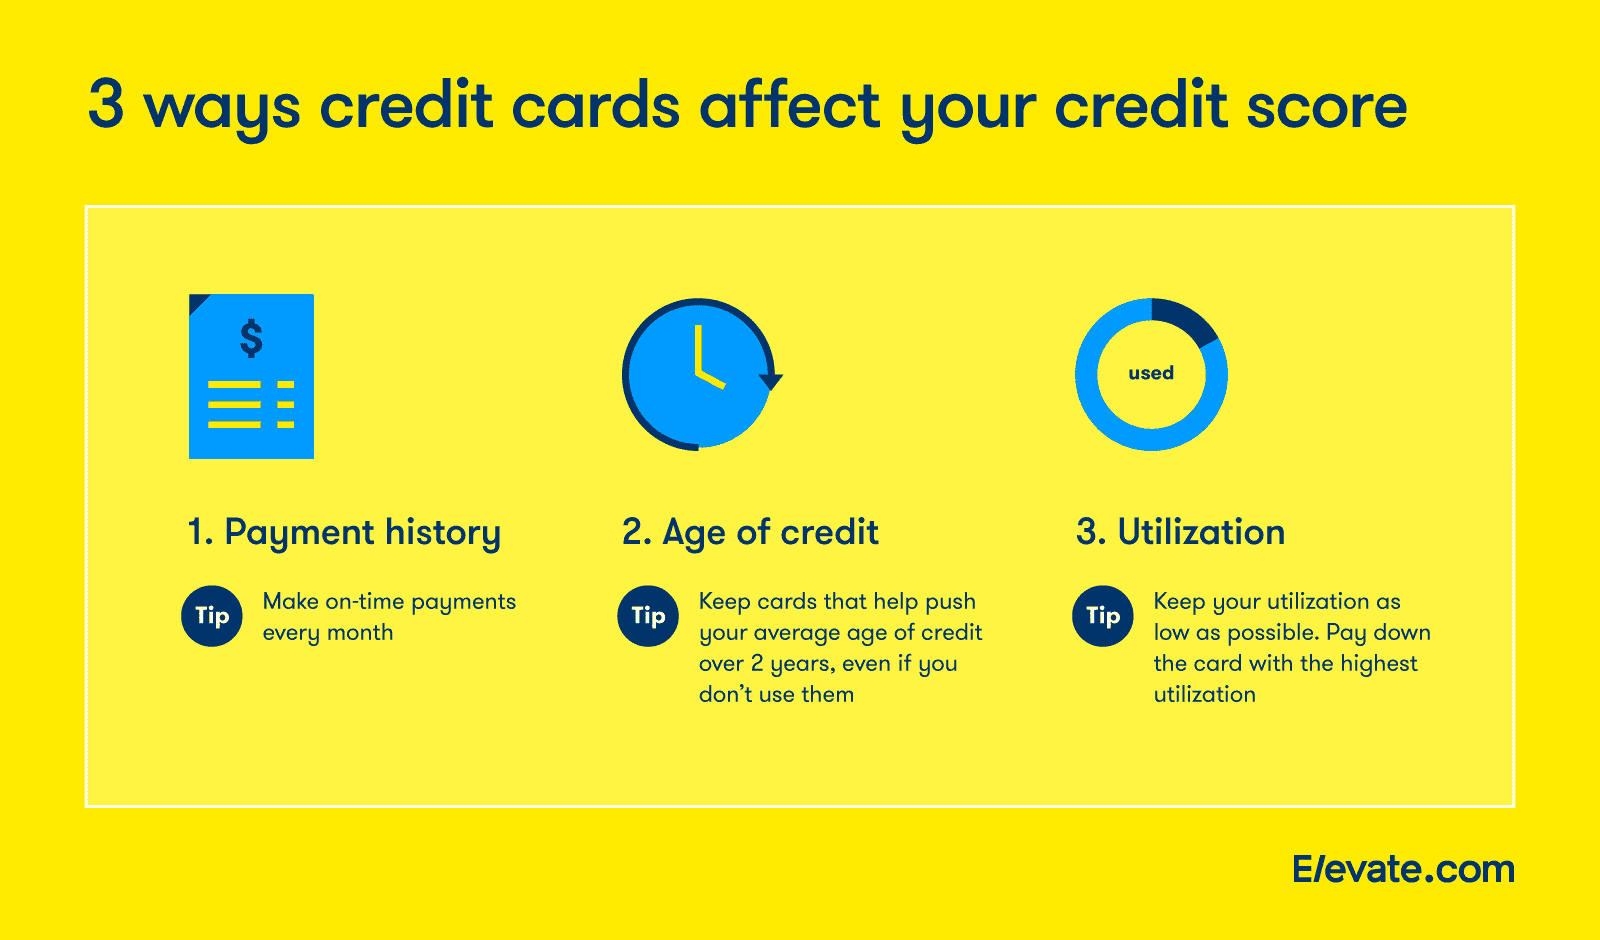 3 ways credit cards affect your credit score.  1) Payment history. Tip: Make on-time payments every month